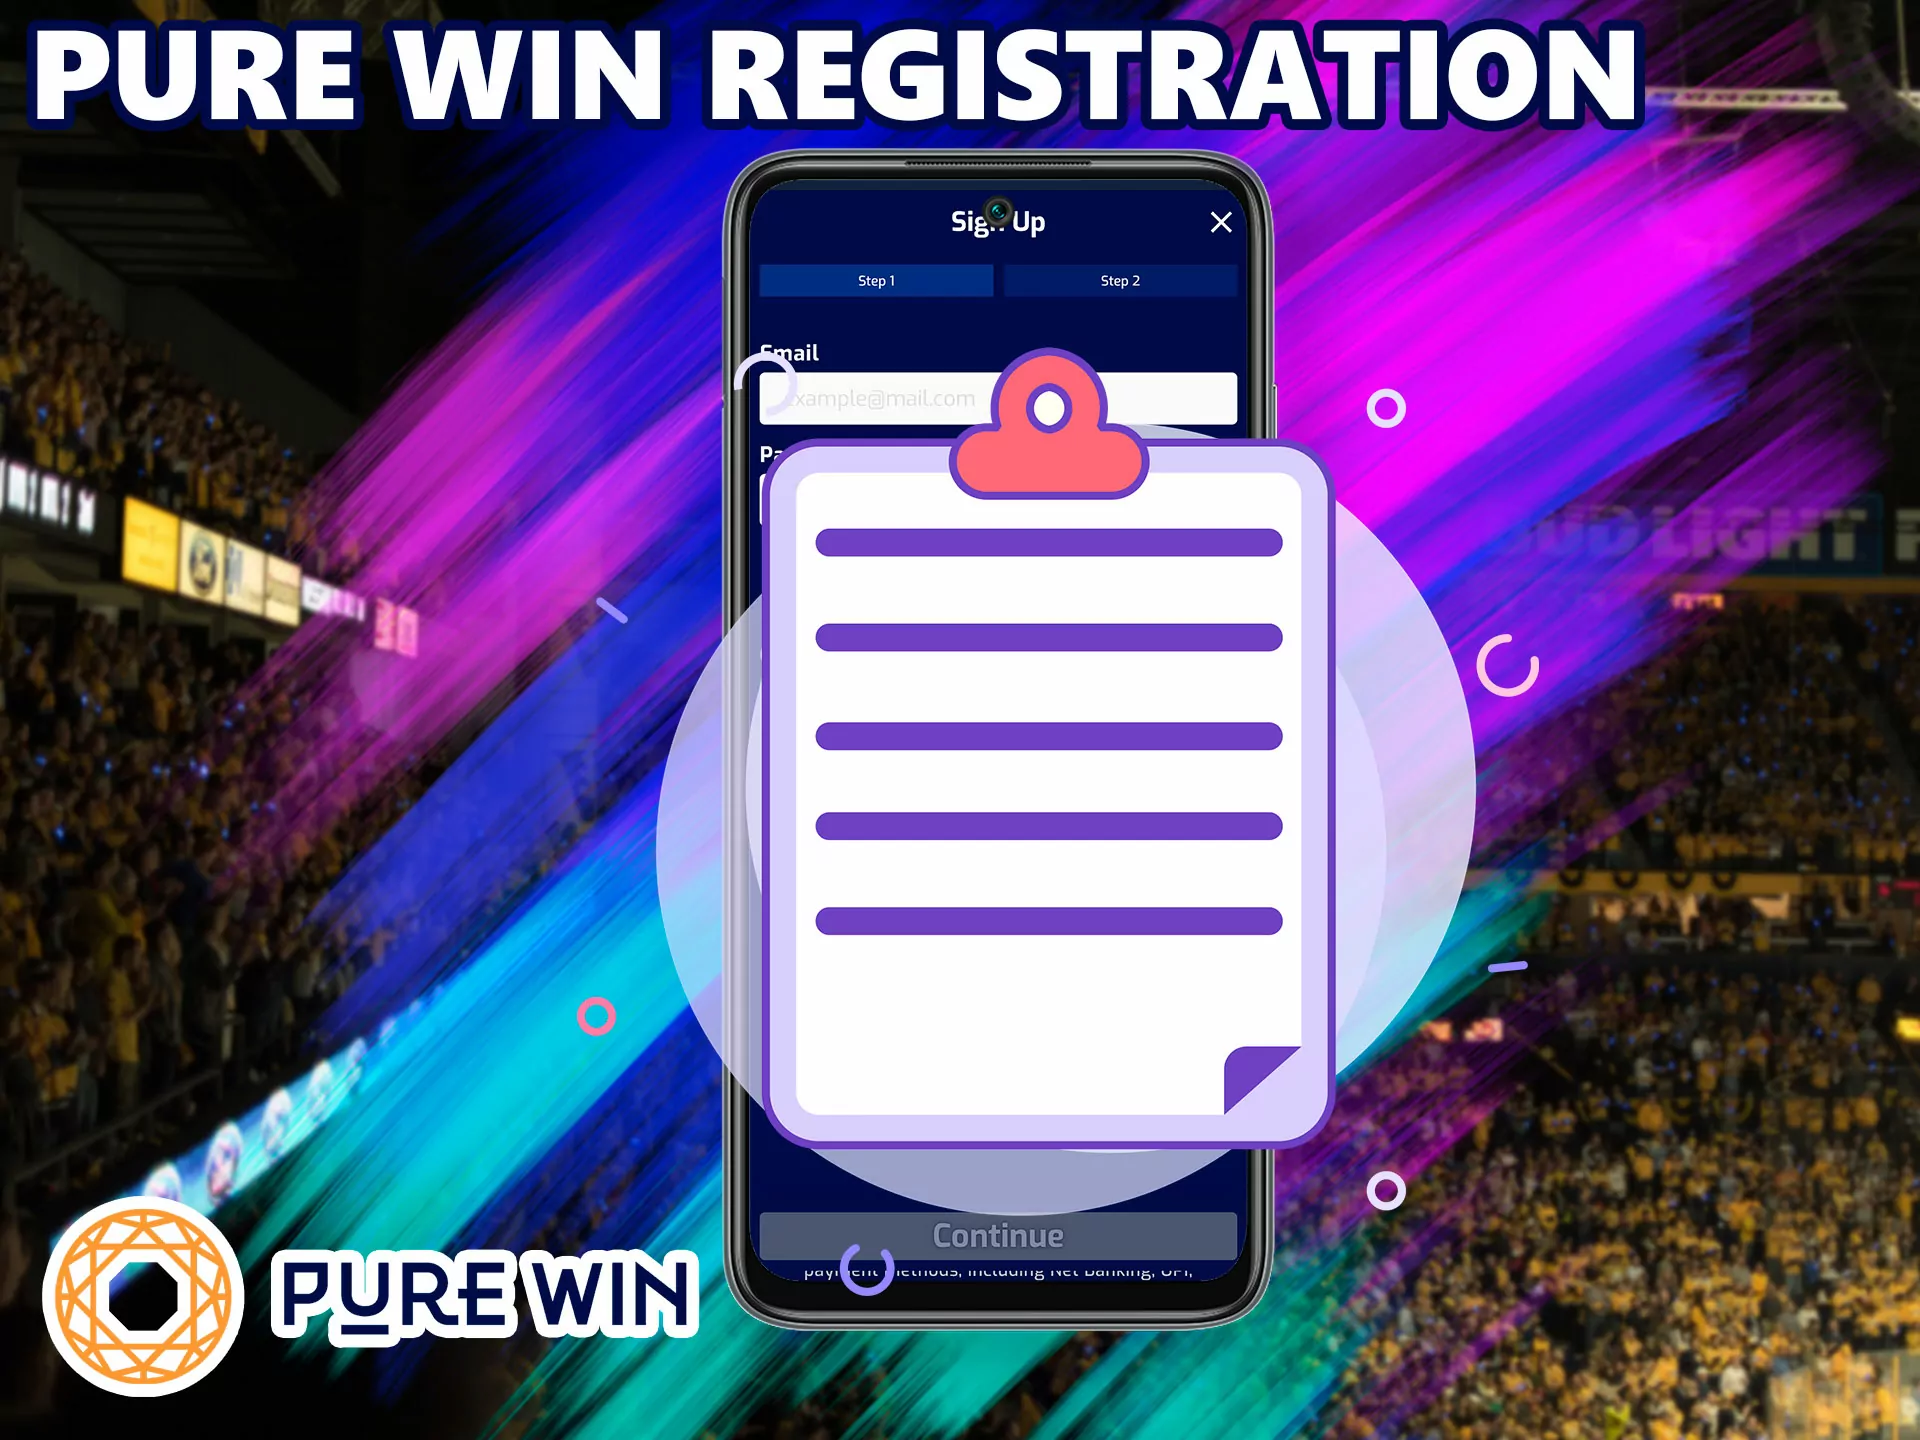 Learn how to create a Pure Win account with our simple guide.